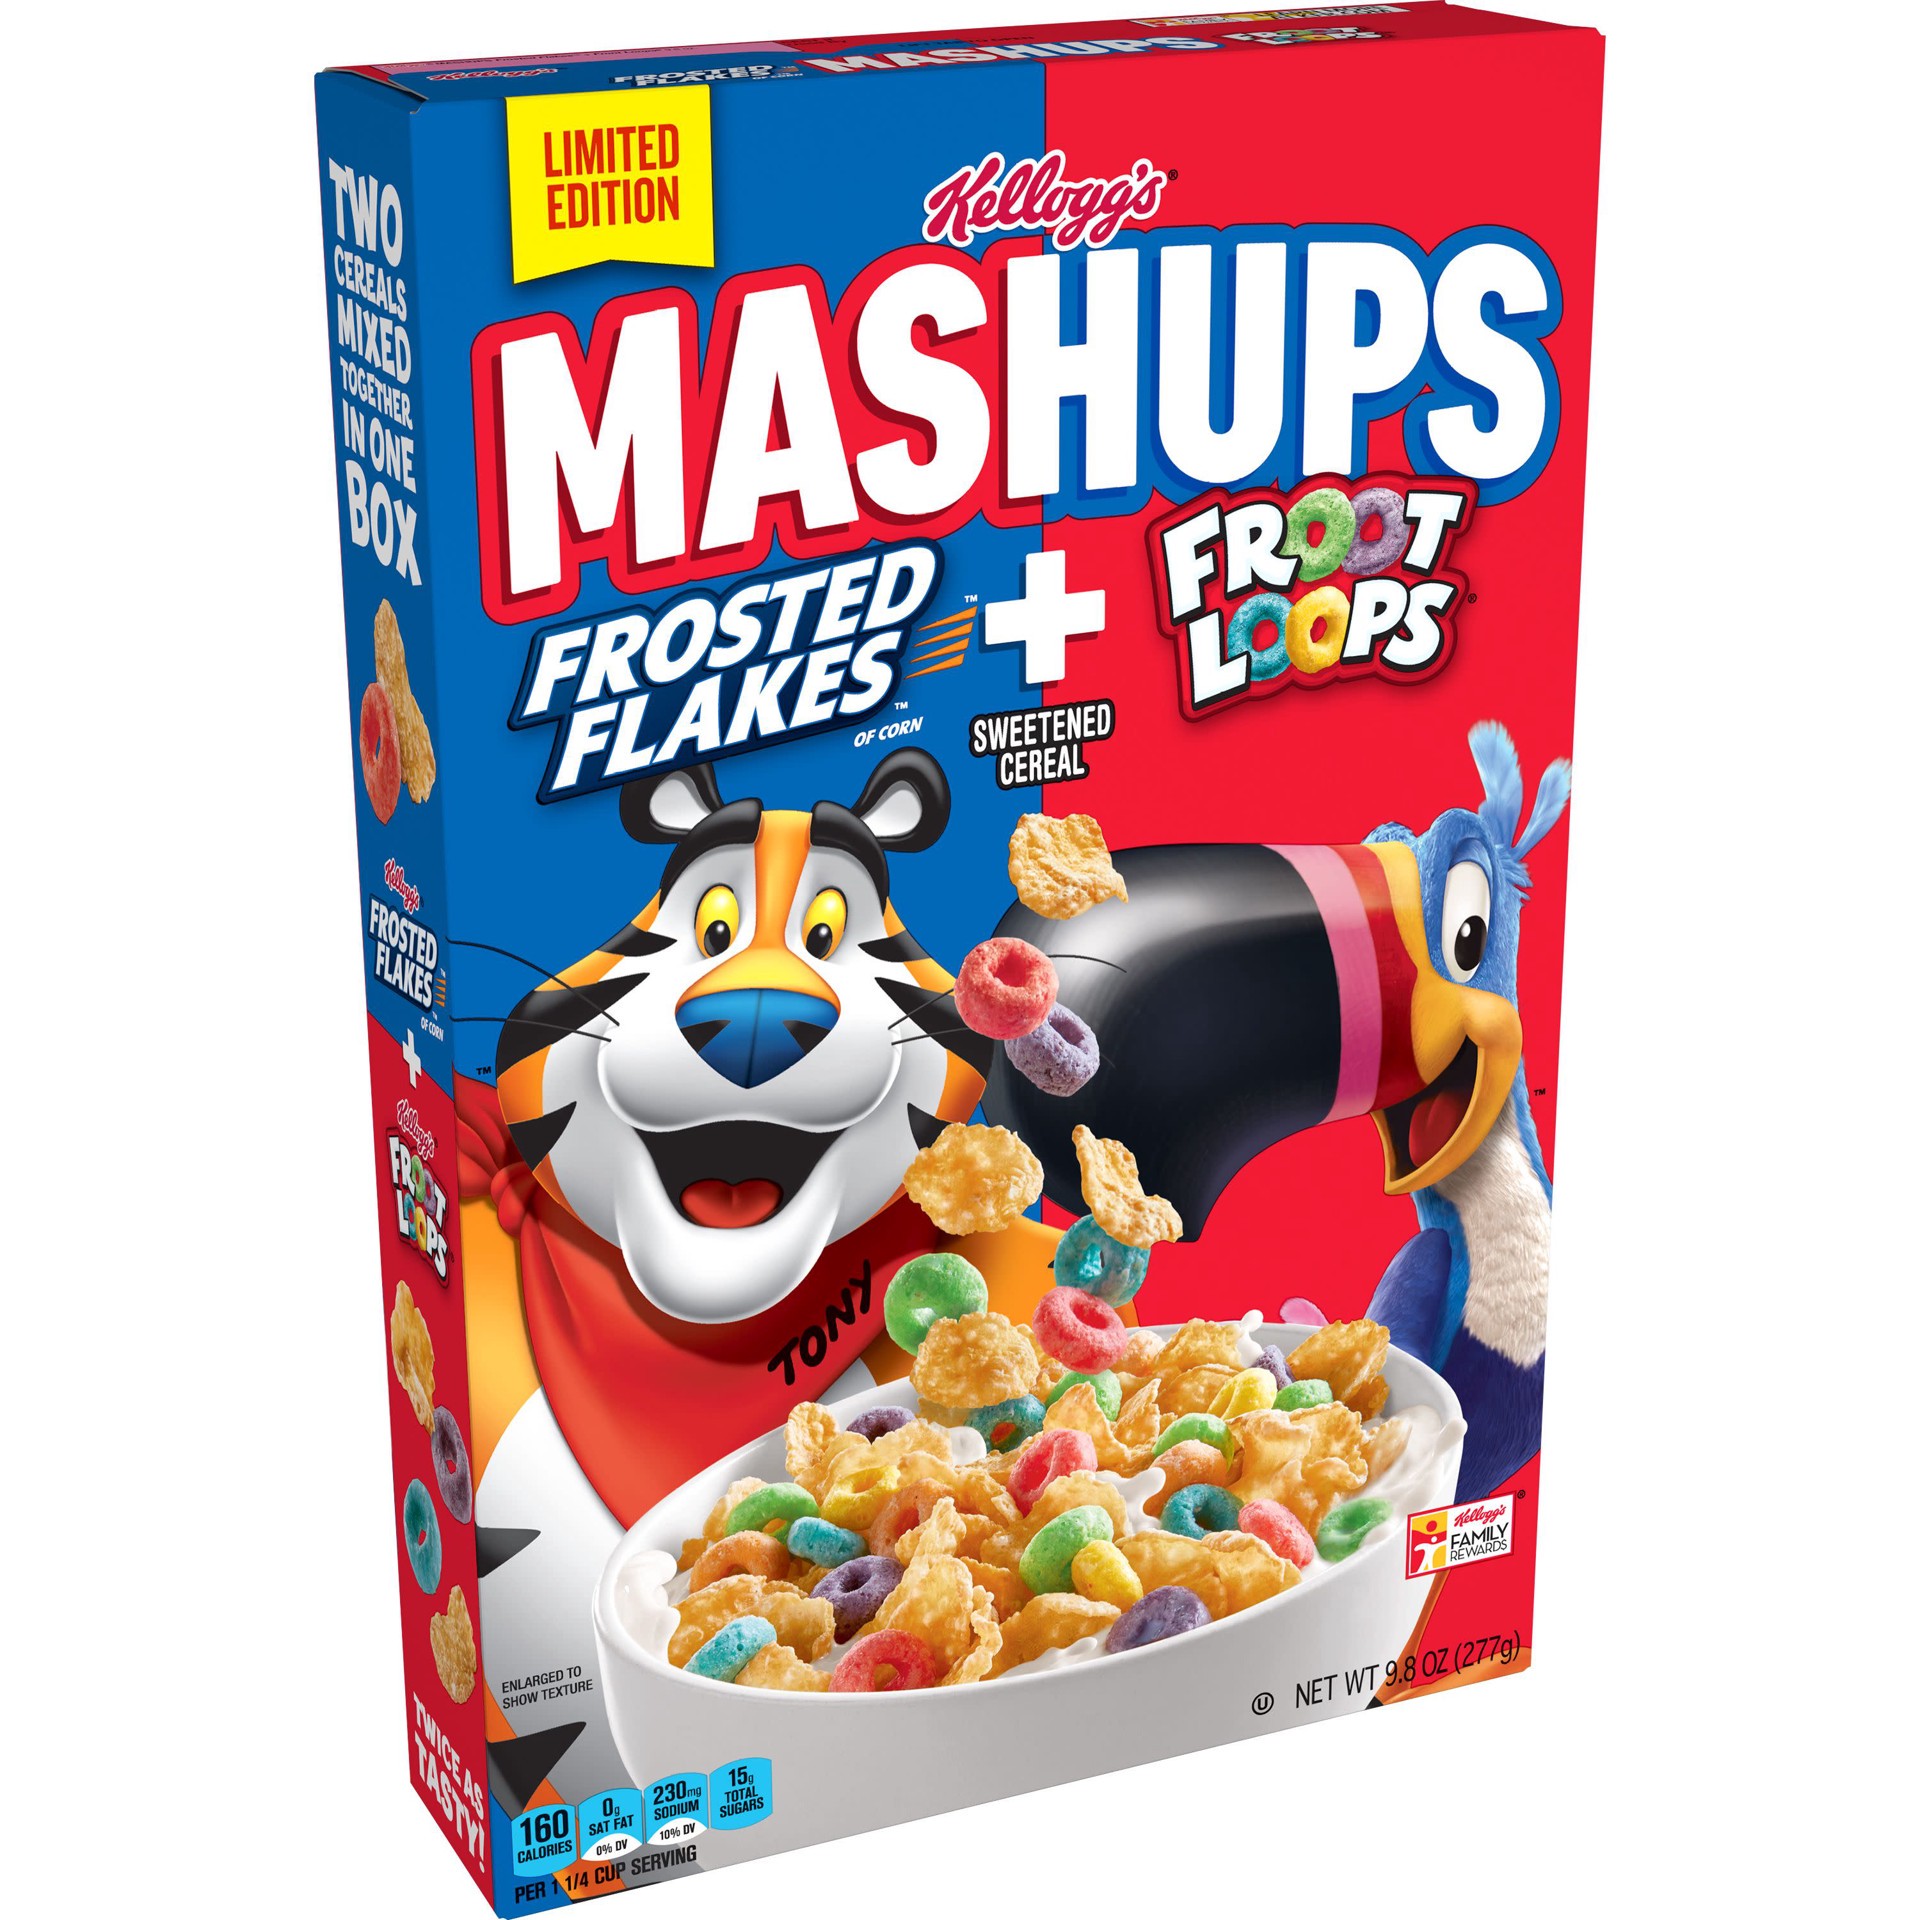 slide 1 of 5, Mashups Kellogg's Mashups Breakfast Cereal, Limited Edition, Kids Snacks, Frosted Flakes and Froot Loops, 9.8oz Box, 1 Box, 9.8 oz